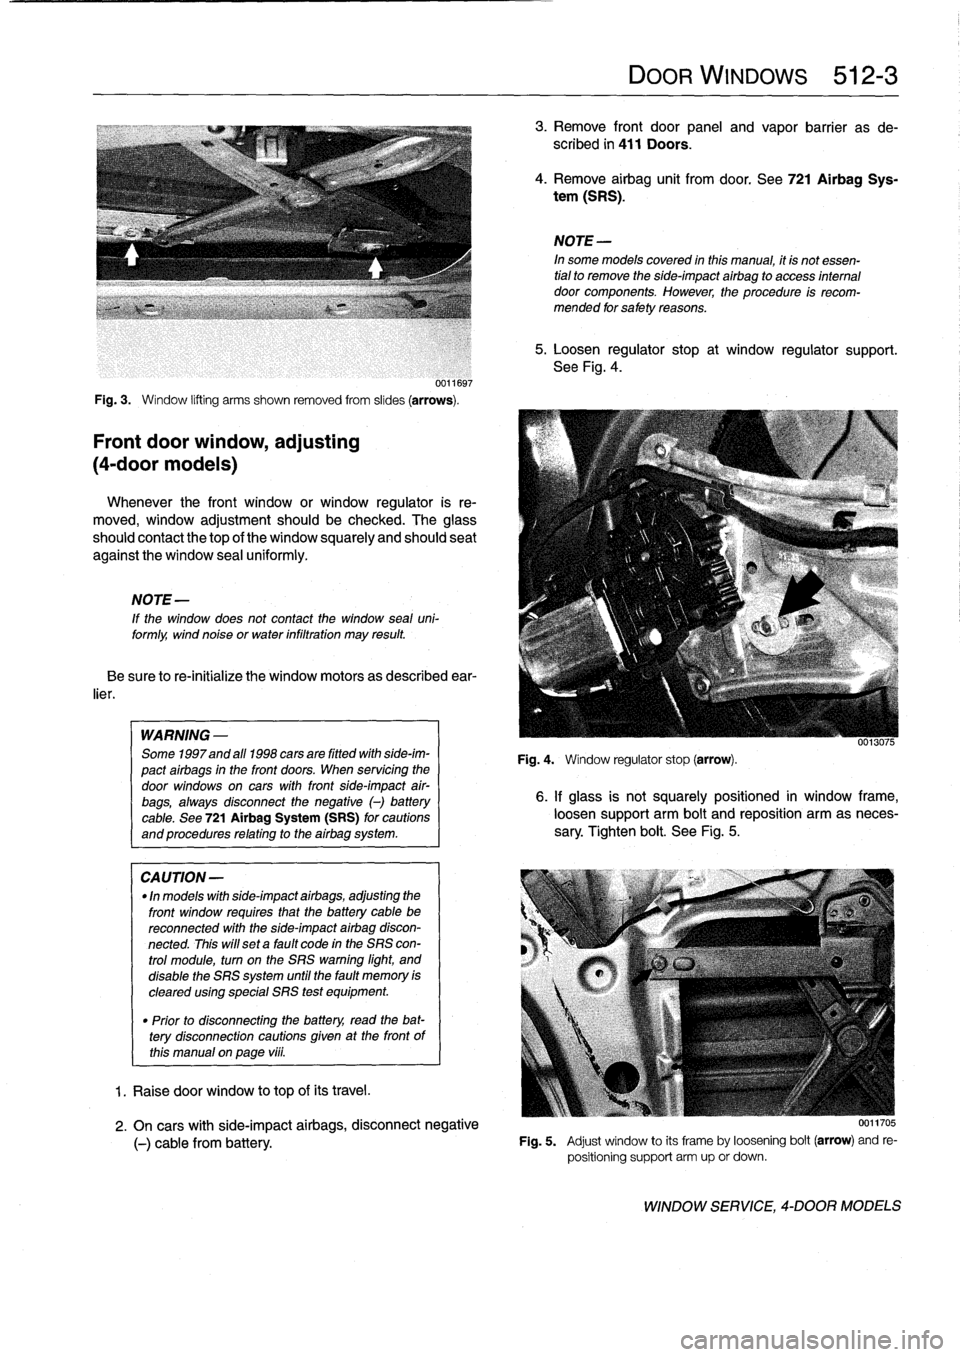 BMW 318i 1996 E36 Workshop Manual 
0011697

Fig
.
3
.

	

Window
lifting
arms
shown
removed
from
slides
(arrows)
.

Front
door
window,
adjusting

(4-door
models)

Whenever
the
front
window
or
window
regulator
is
re-

moved,
window
adj